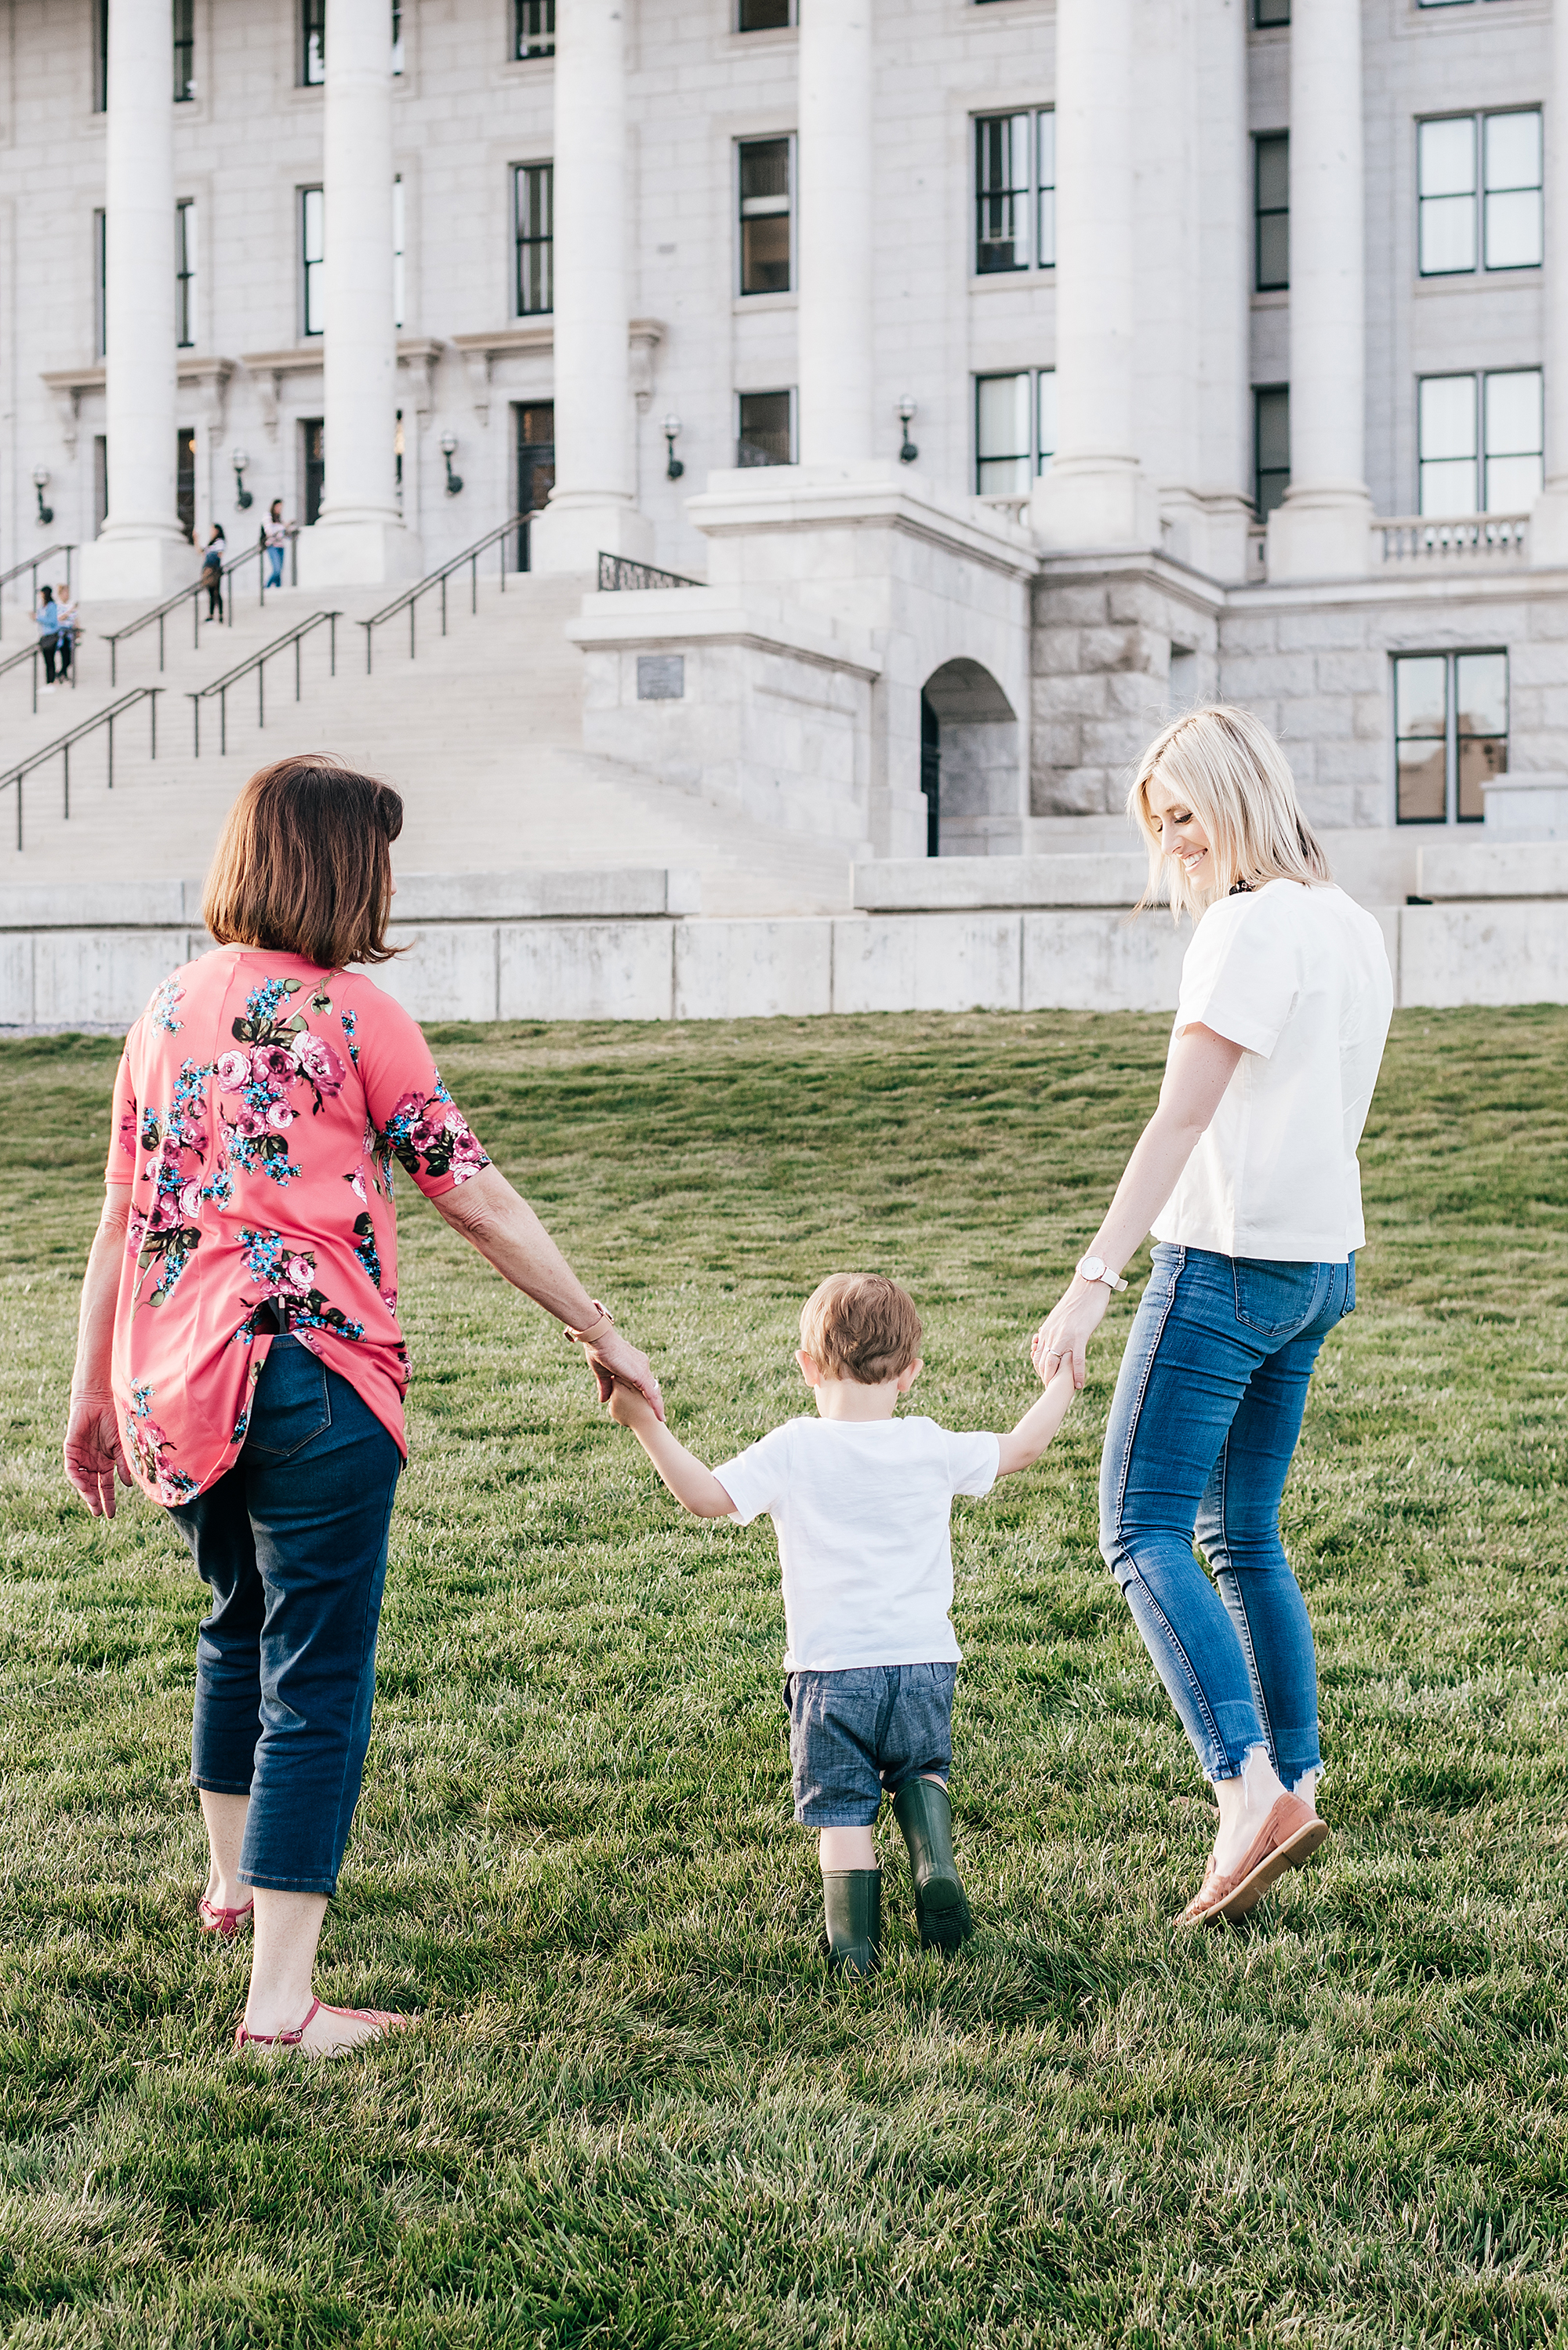 Meaningful Mothers Day Gift Ideas For The Mom Who Is Always Giving | Little Miss Fearless